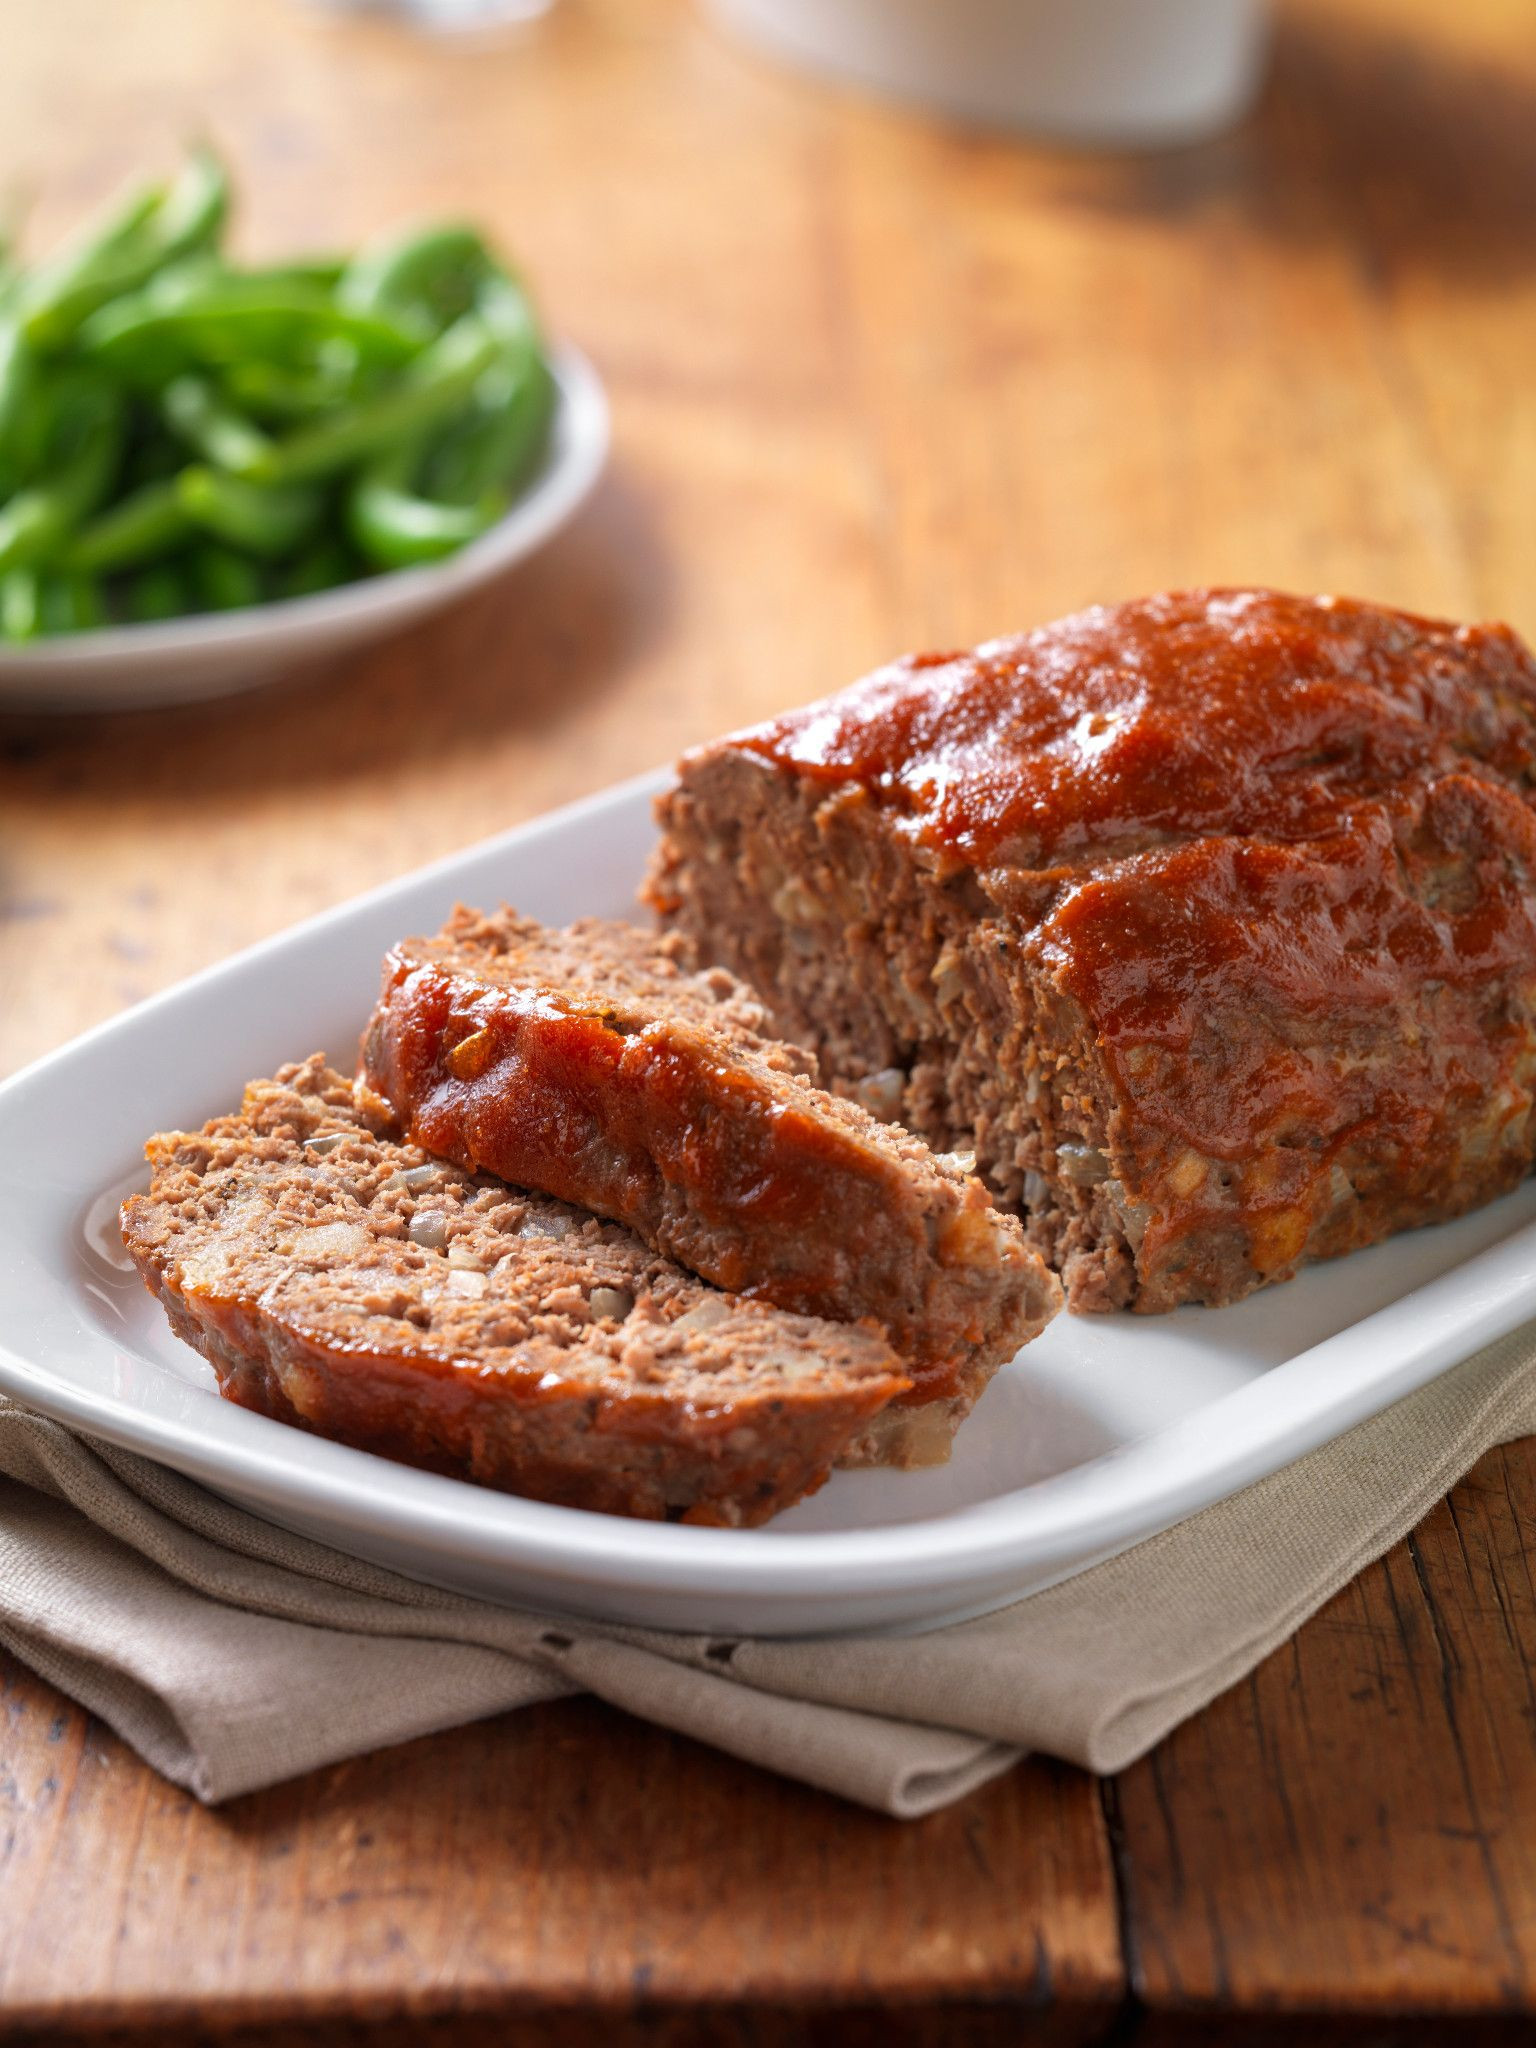 How To Make Meatloaf Without Breadcrumbs
 Meatloaf Recipe Made With Panko Bread Crumbs